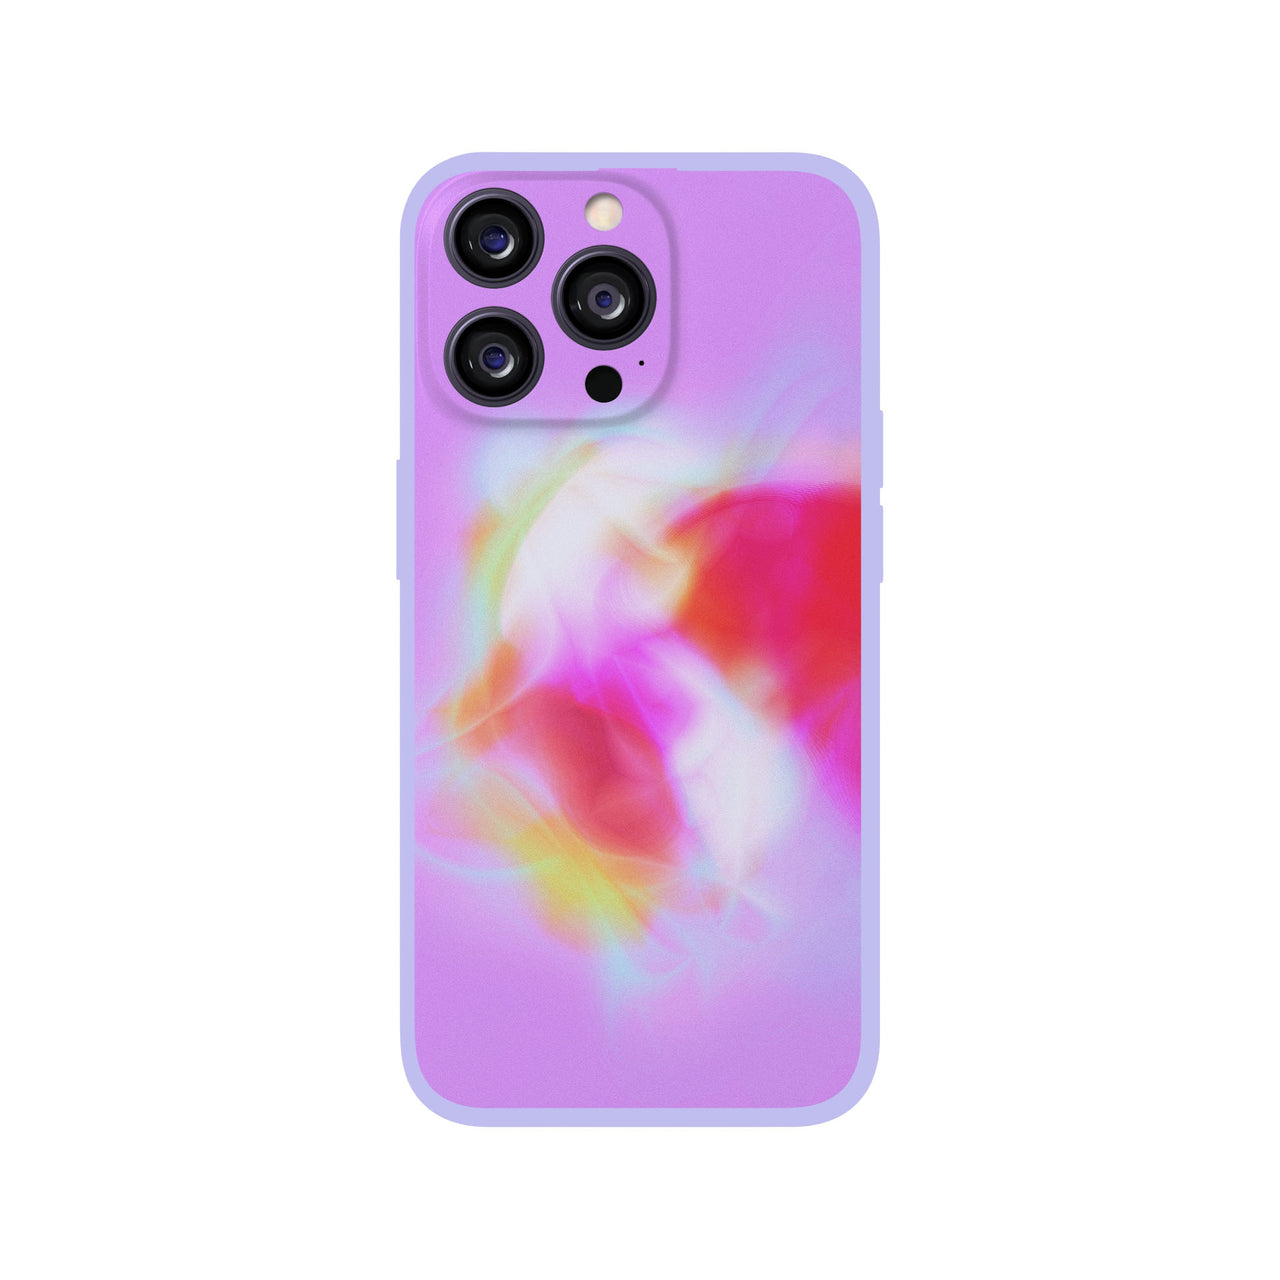 We are Born of Love Phone Case